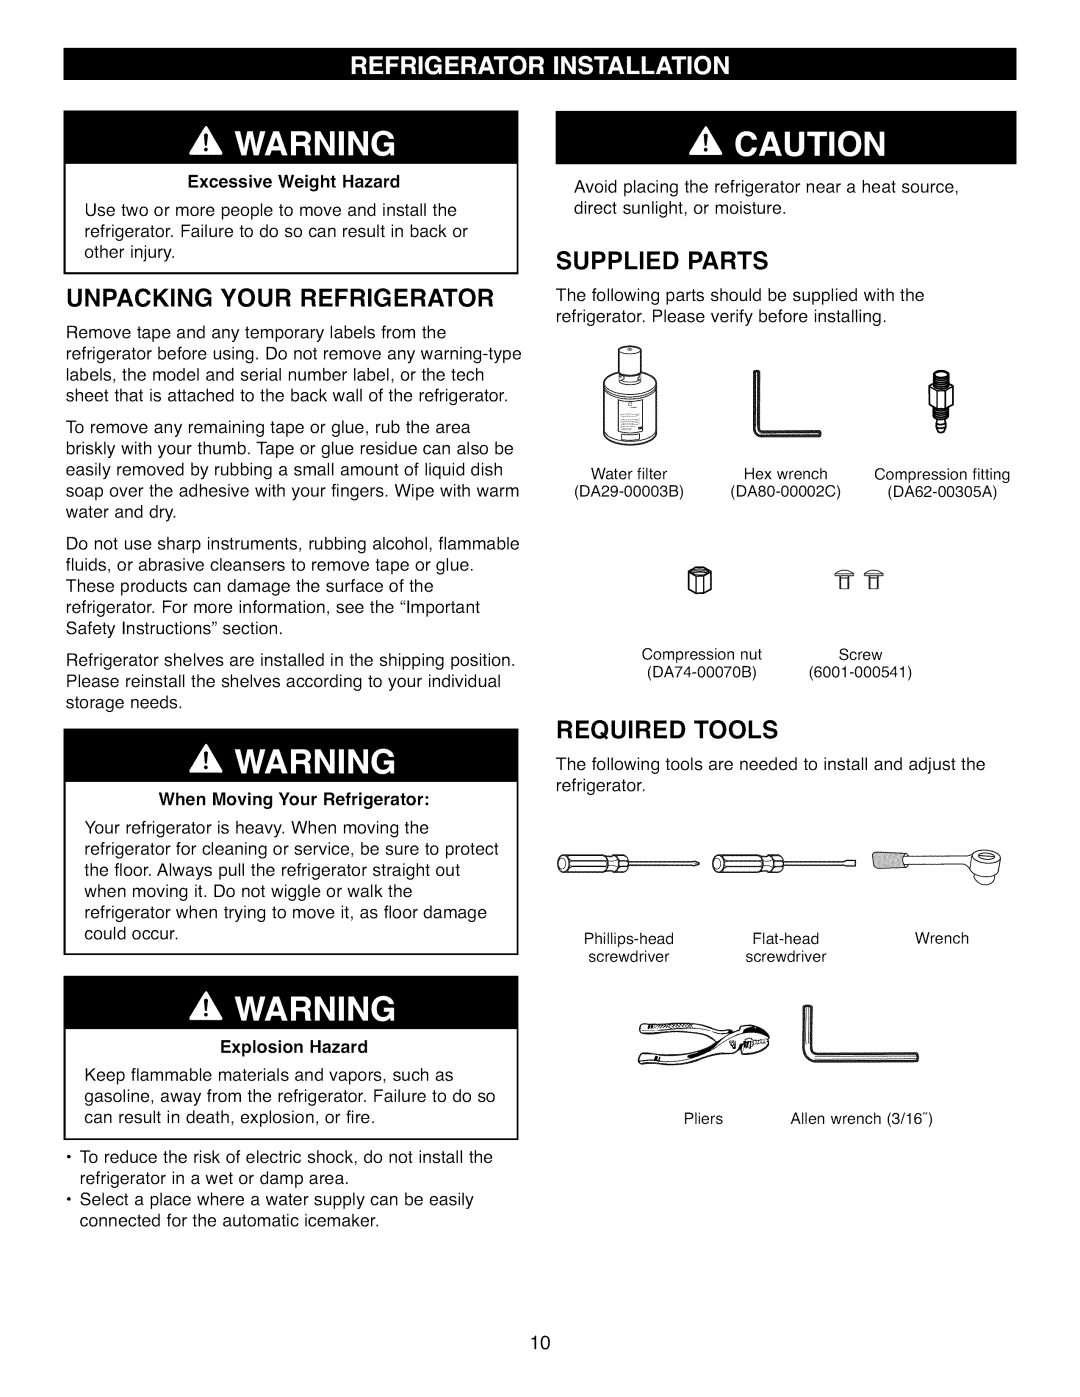 Kenmore 41002, 41003, 41009 manual Unpacking Your Refrigerator, Supplied Parts, Required Tools 